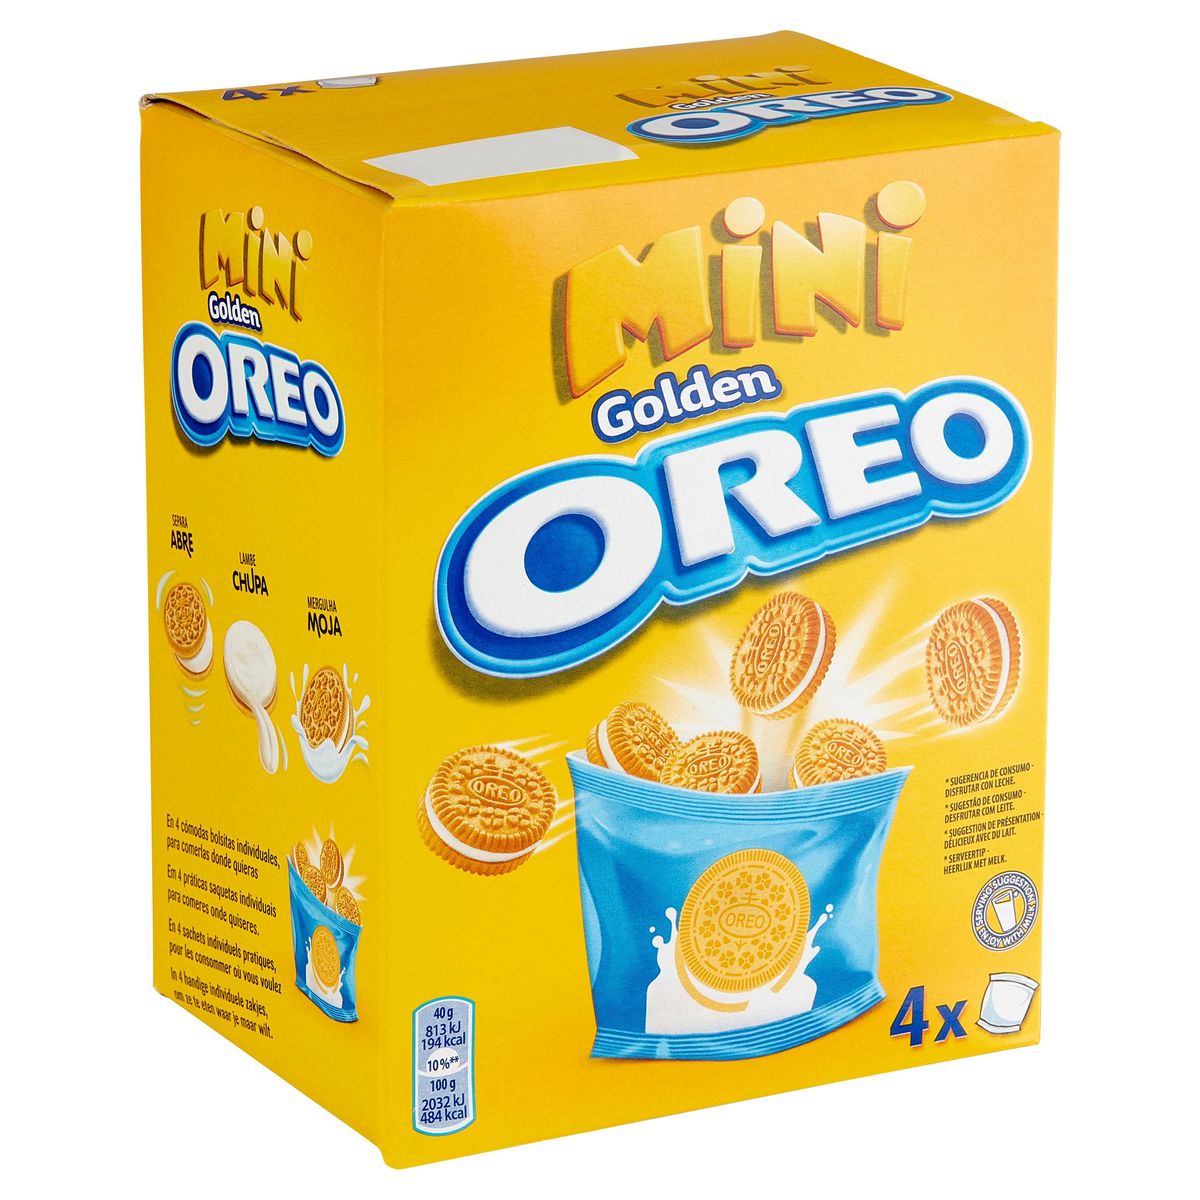 Oreo Golden Mini Biscuits 4 x 40 g